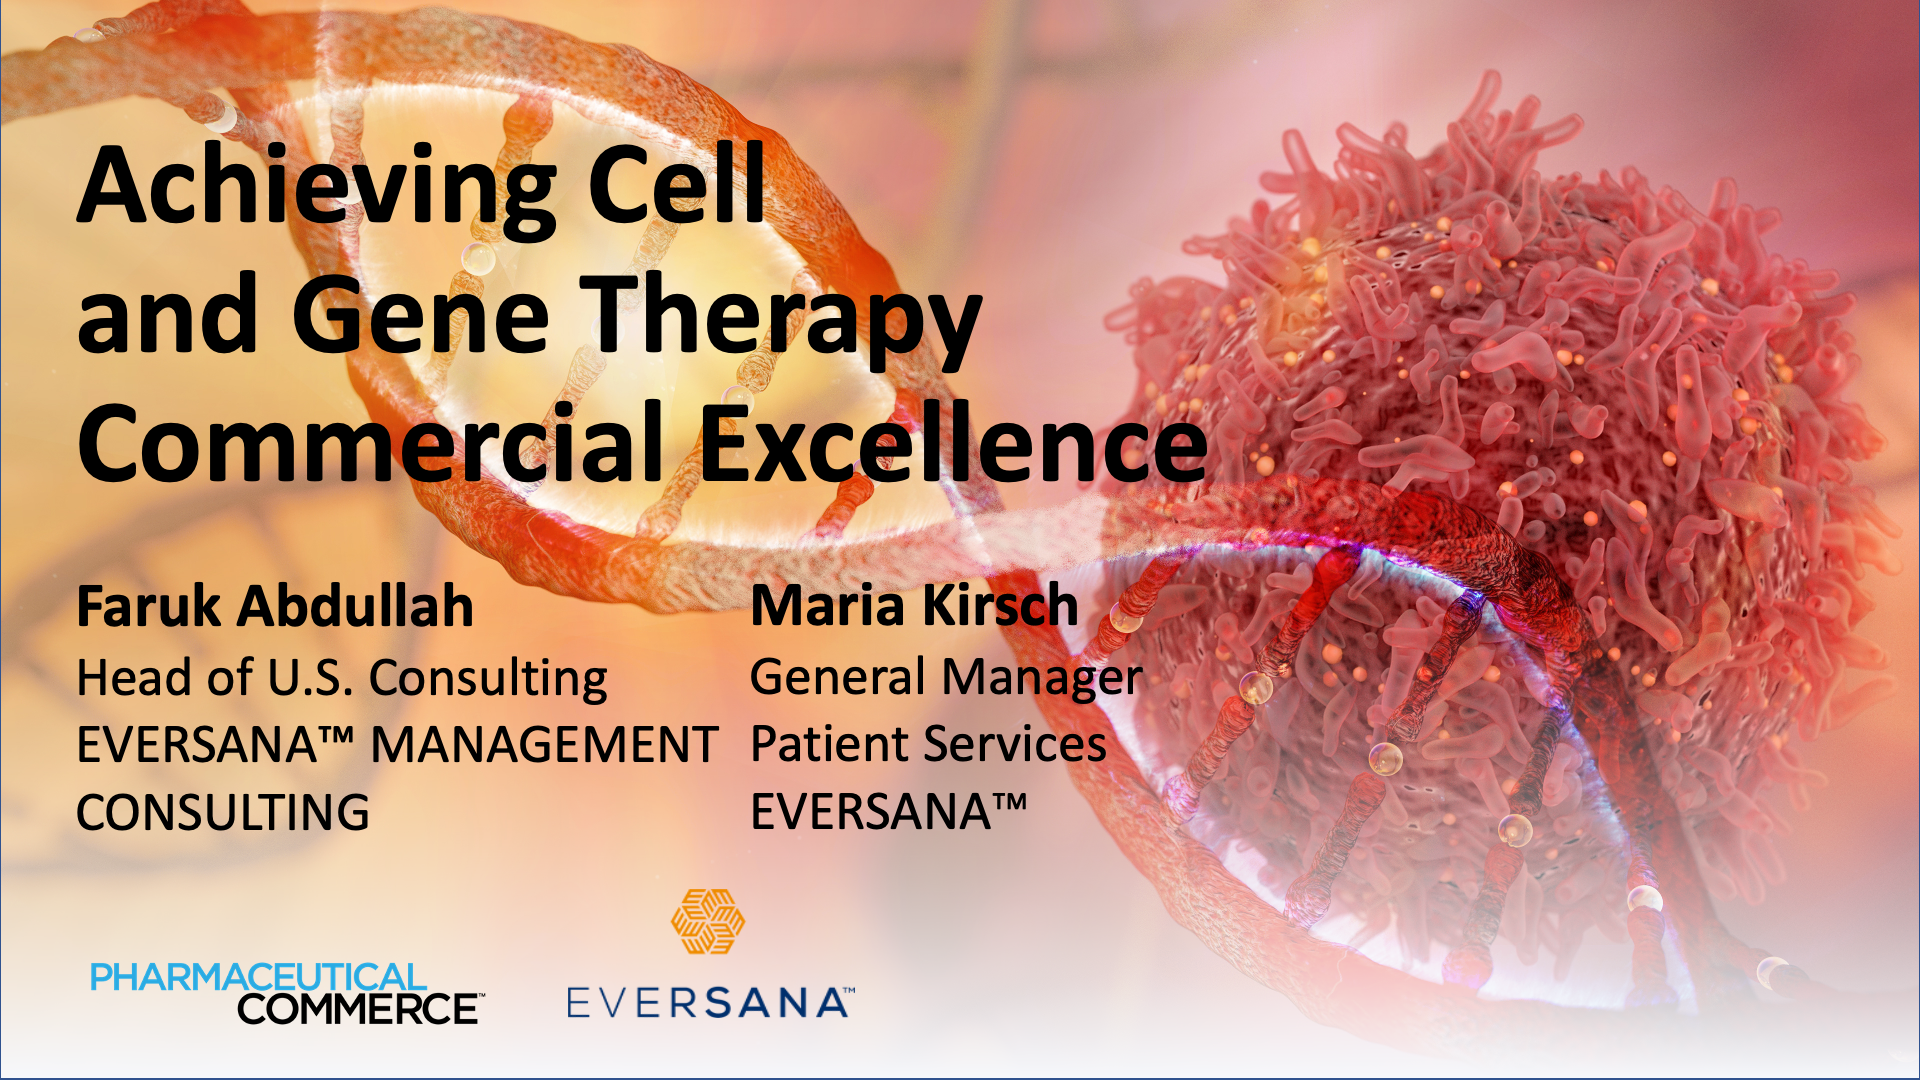 Achieving Cell and Gene Therapy Commercial Excellence